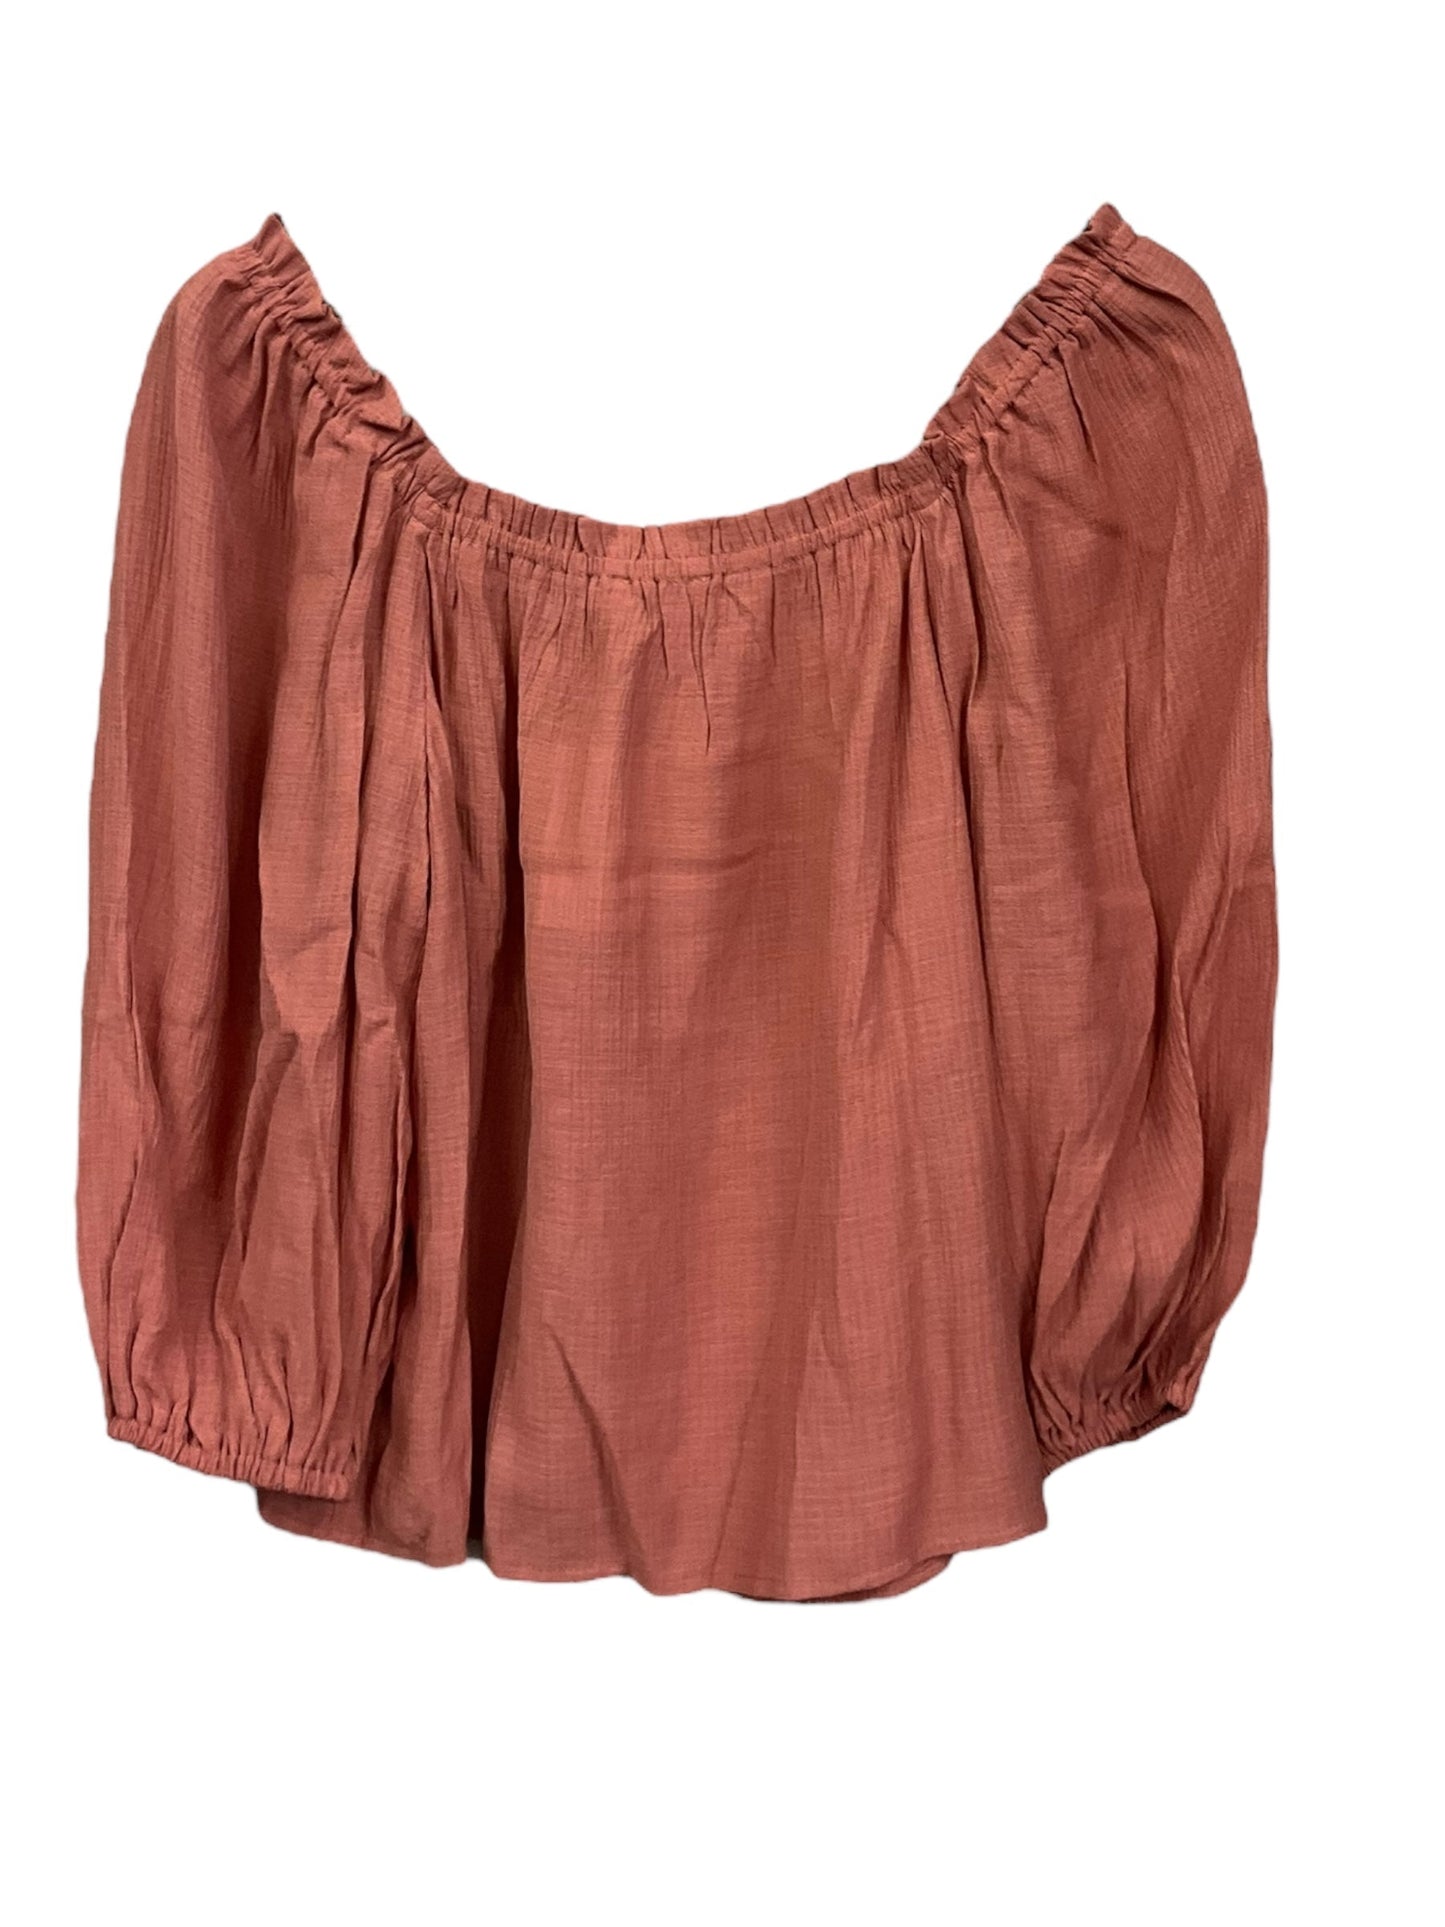 Mauve Top 3/4 Sleeve Clothes Mentor, Size S